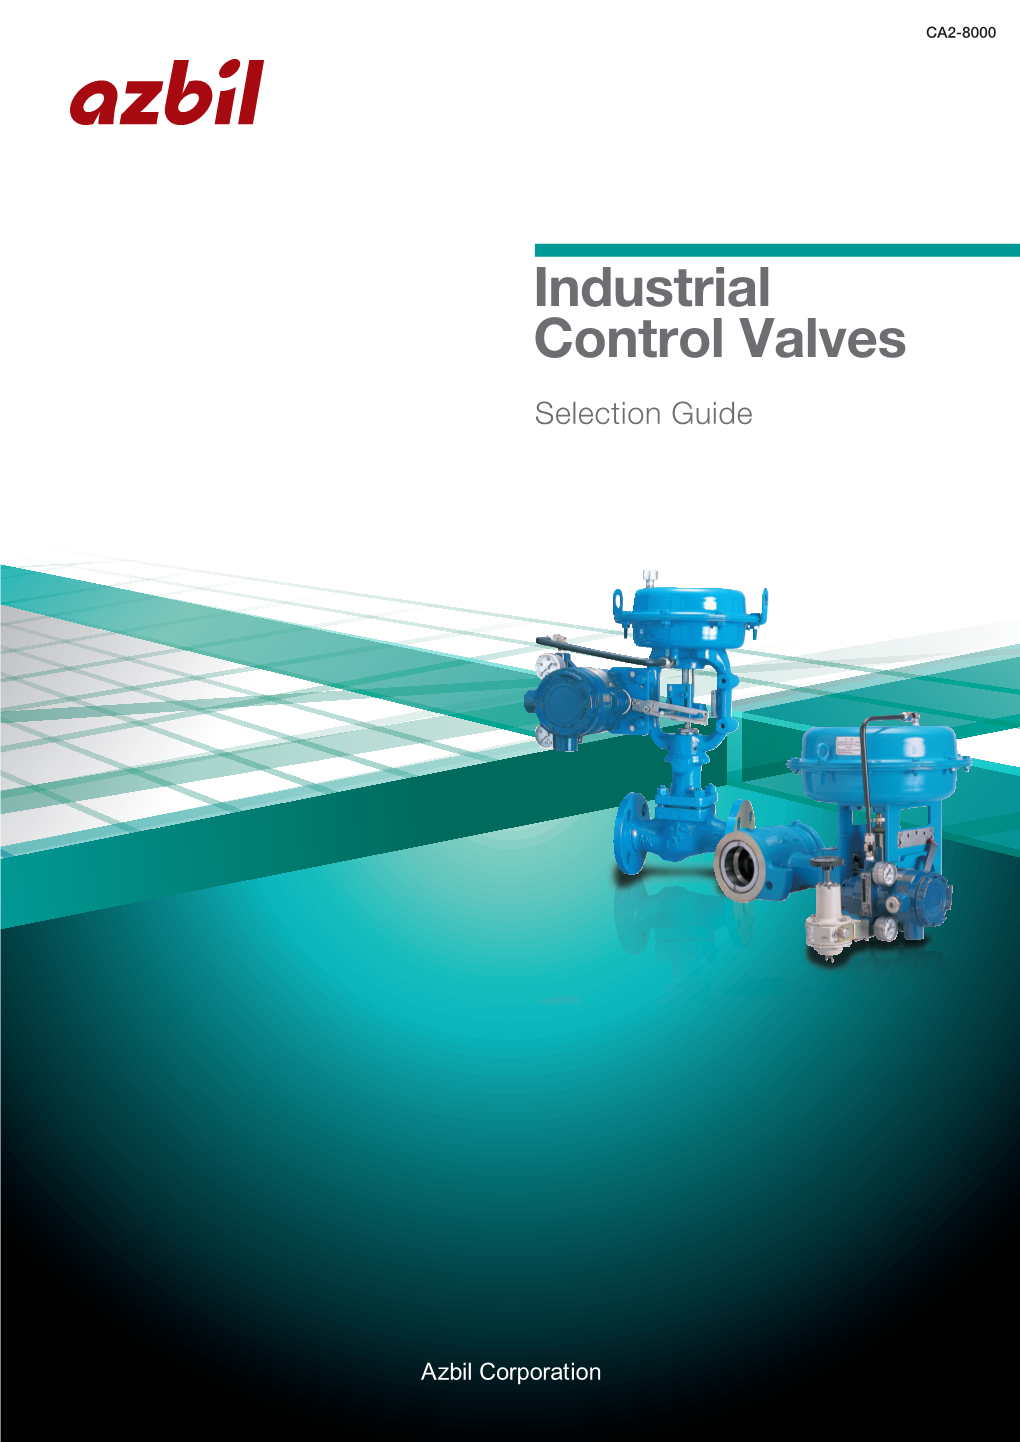 Control Valves Selection Guide for Control Valves, Count on Azbil